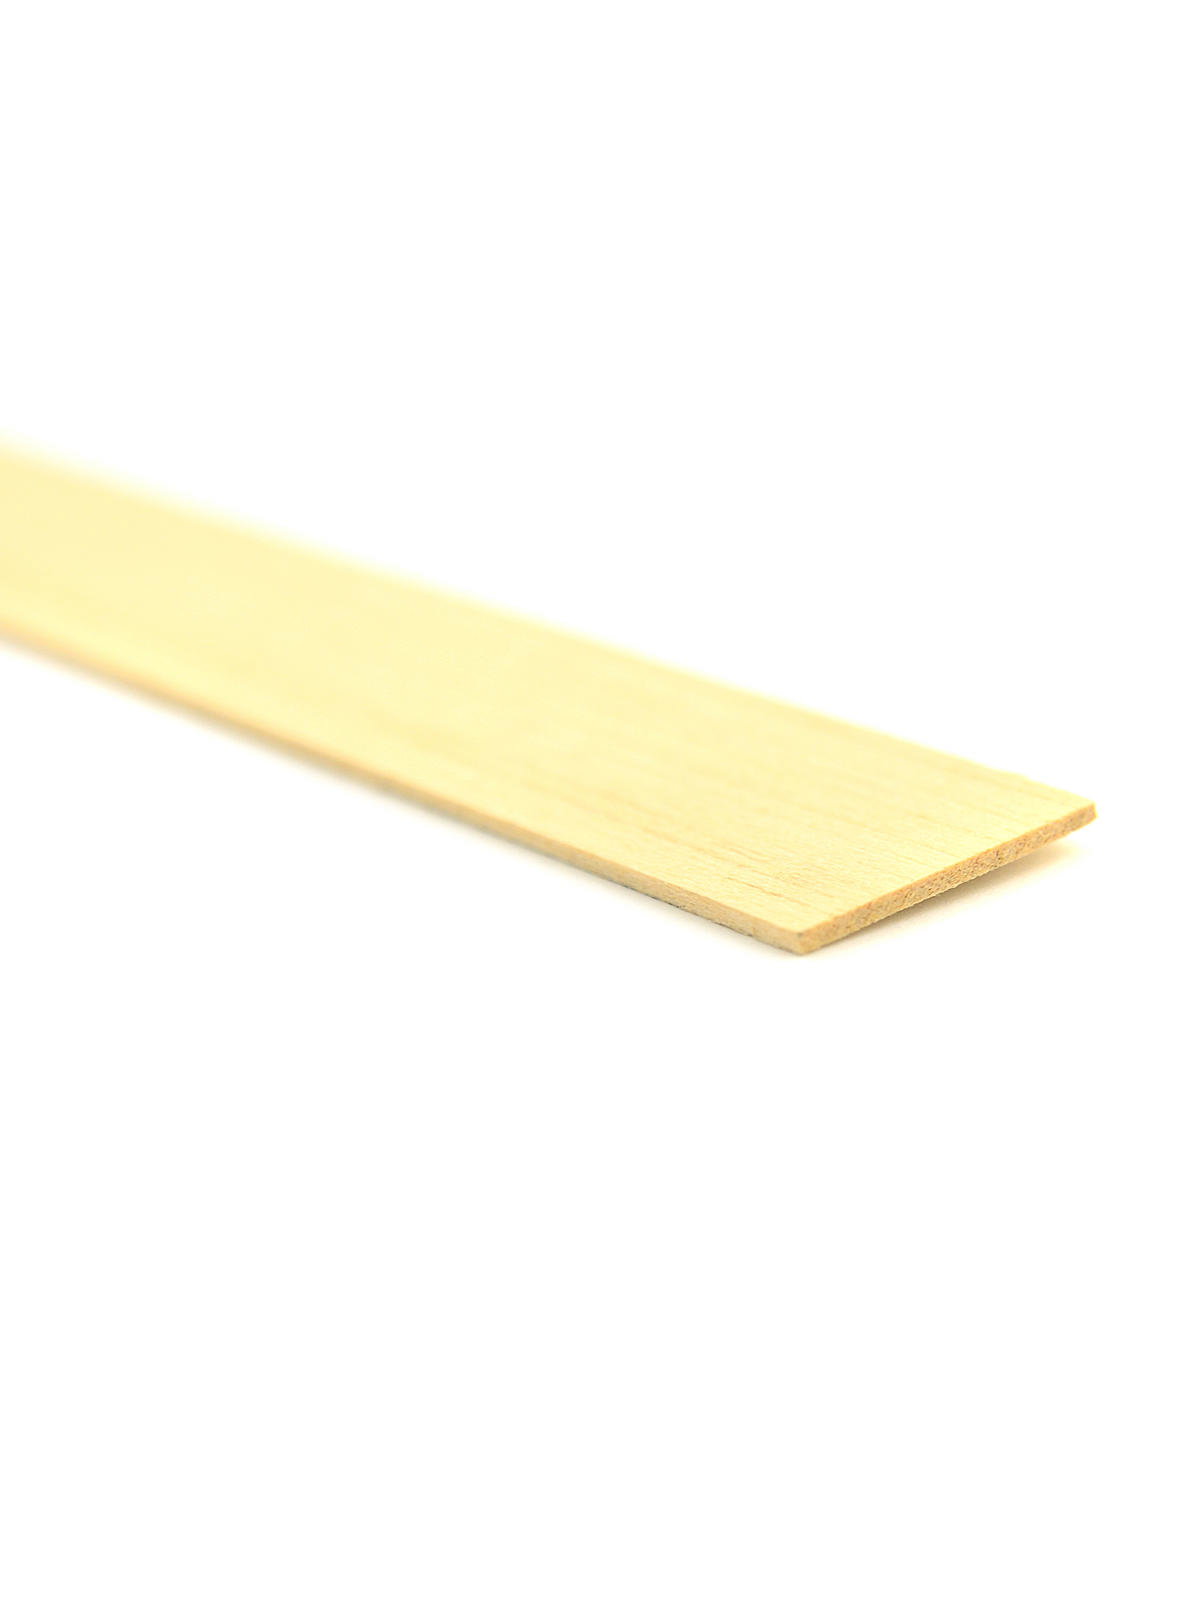 Midwest Basswood Sheets 1/8x2x24 (15) [MID4113] - HobbyTown